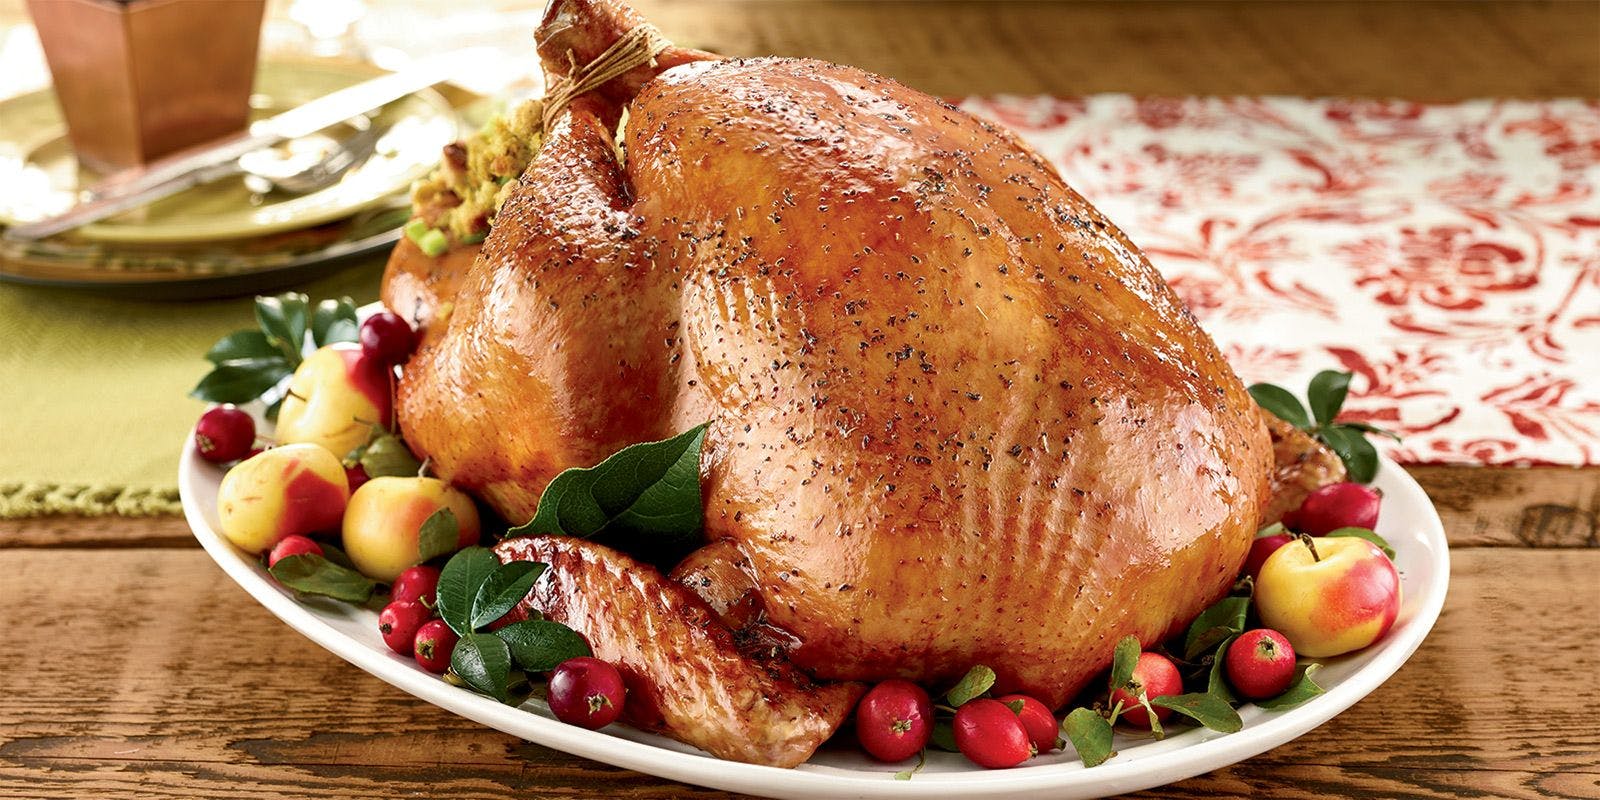 A golden brown roasted turkey on a platter surrounded by apples, cranberries and greenery.